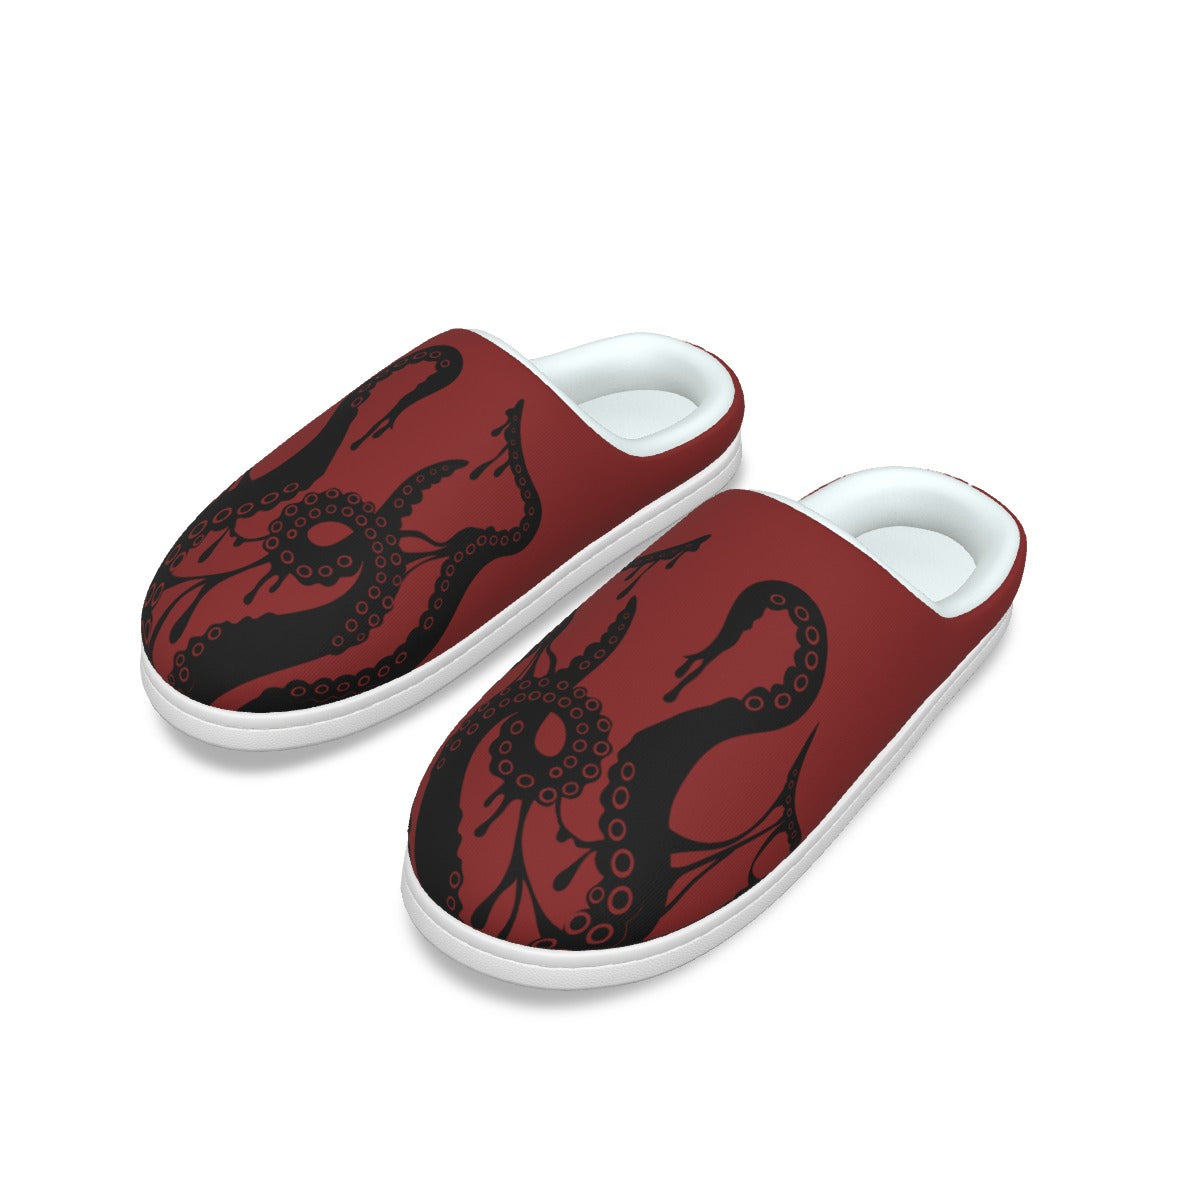 Tentacular Red Plush Slippers (L)